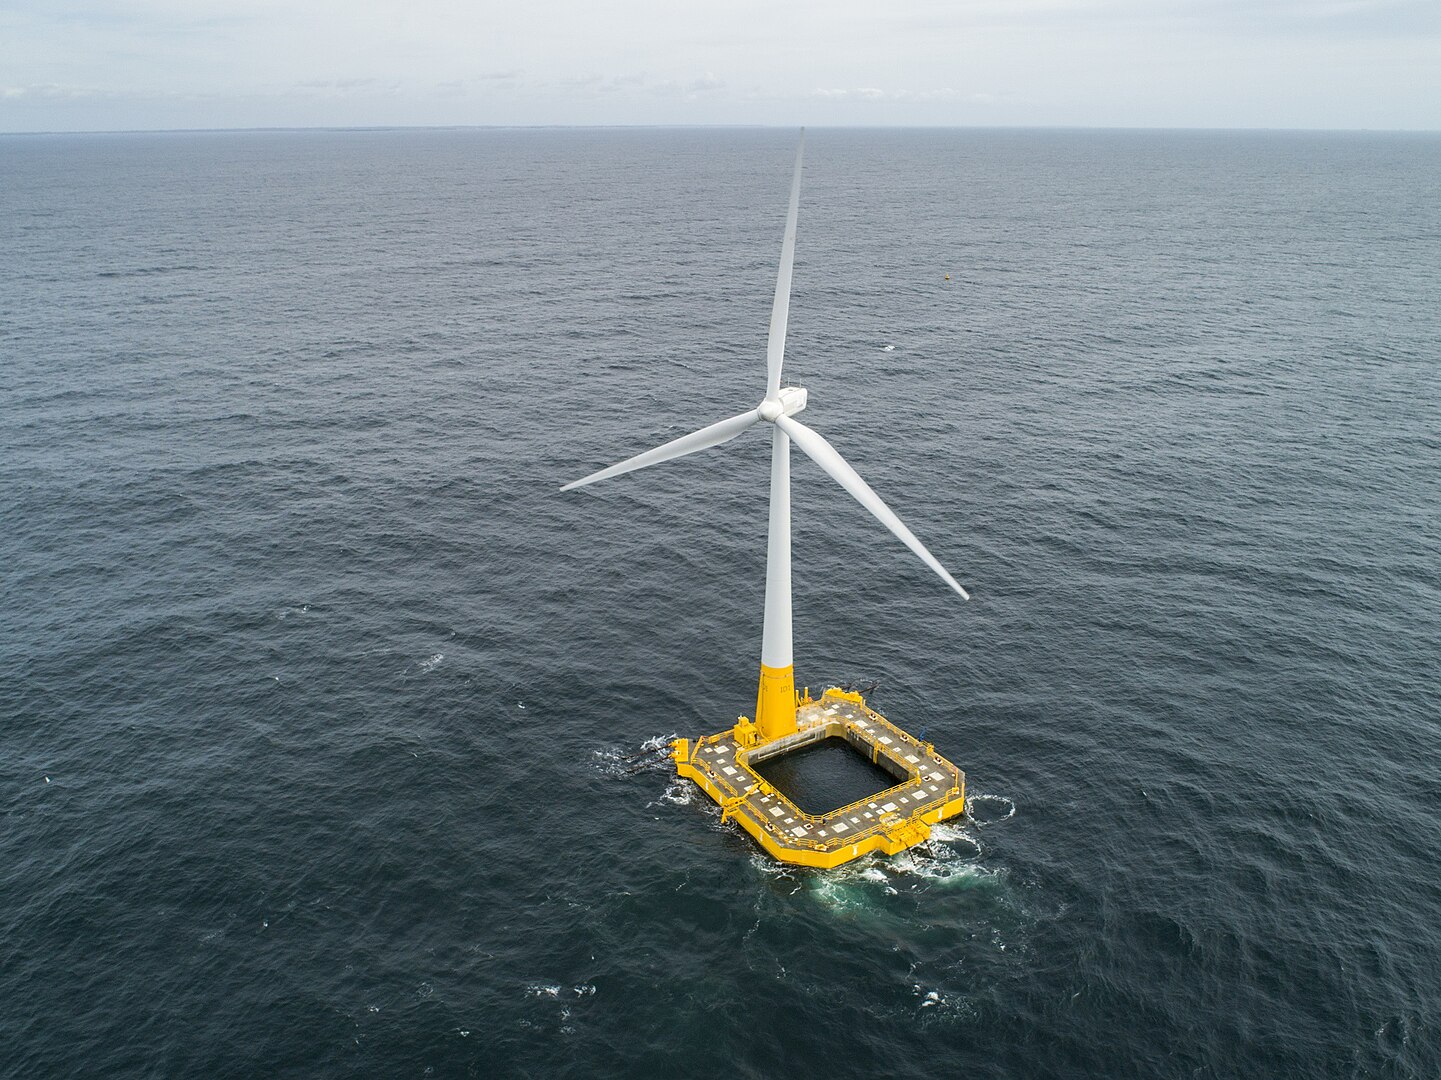 Aerial view of a solitary offshore wind turbine surrounded by open sea, with a cloudy sky above.